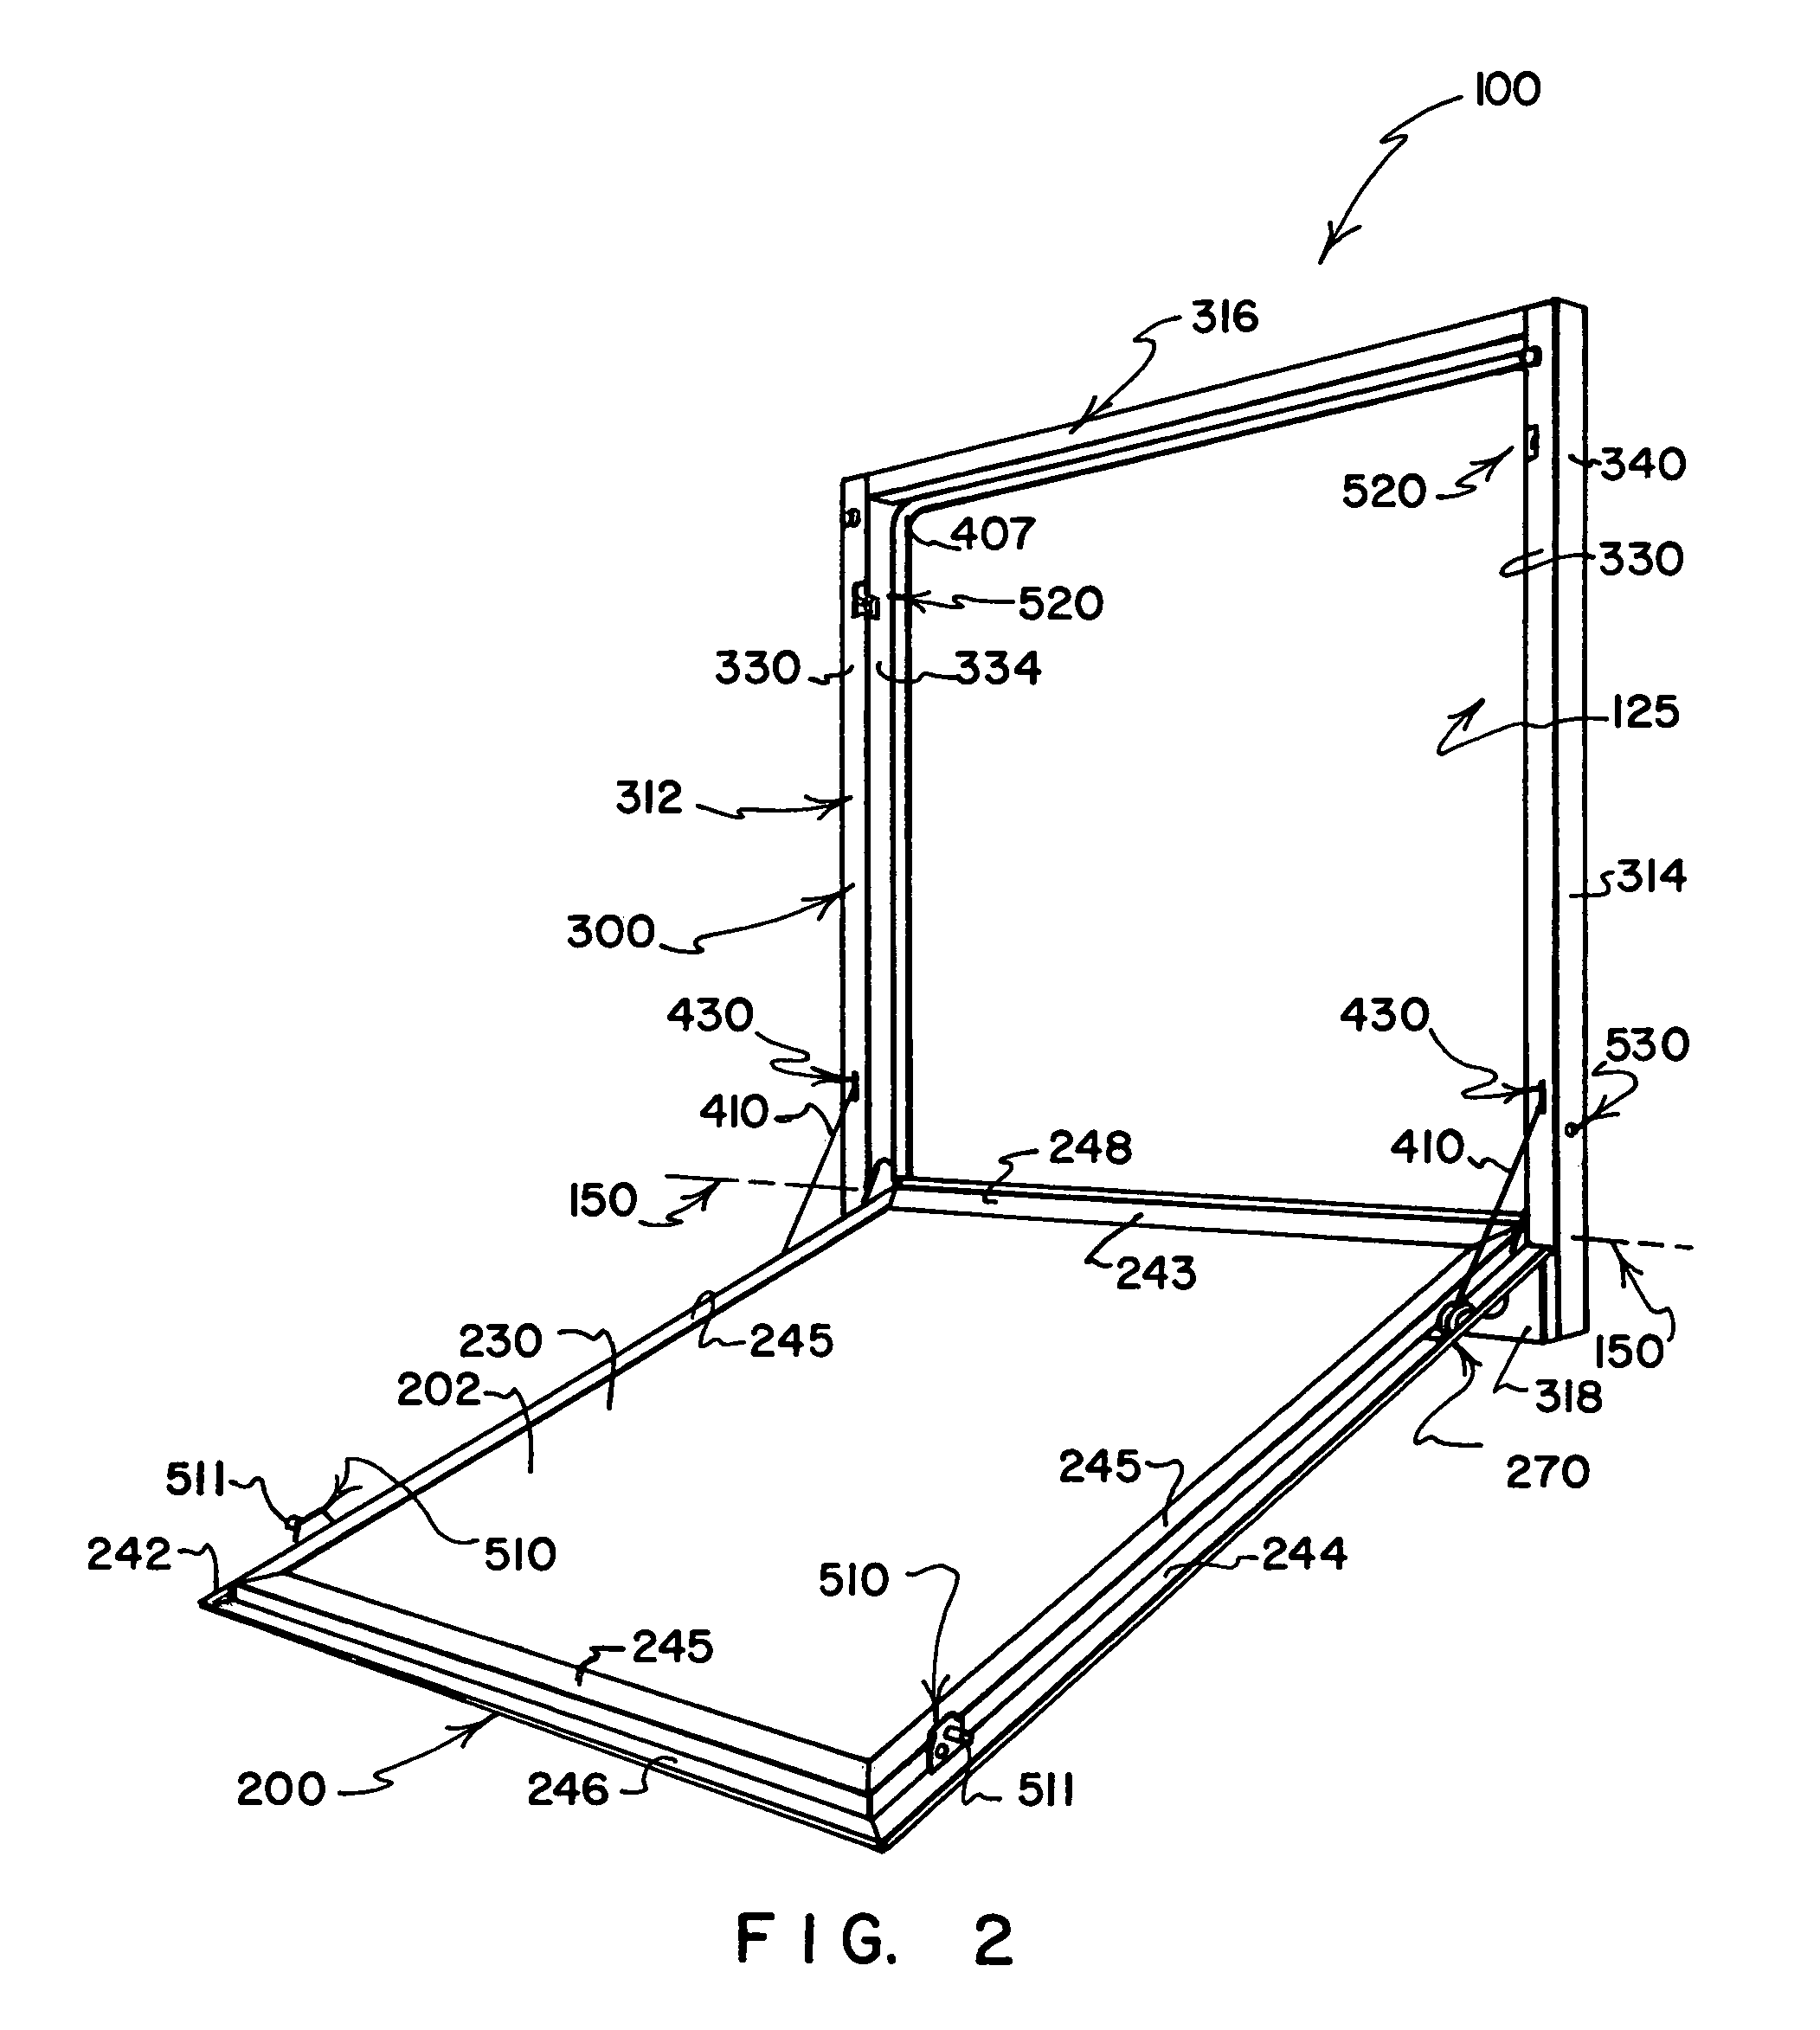 Ramp door and frame assembly